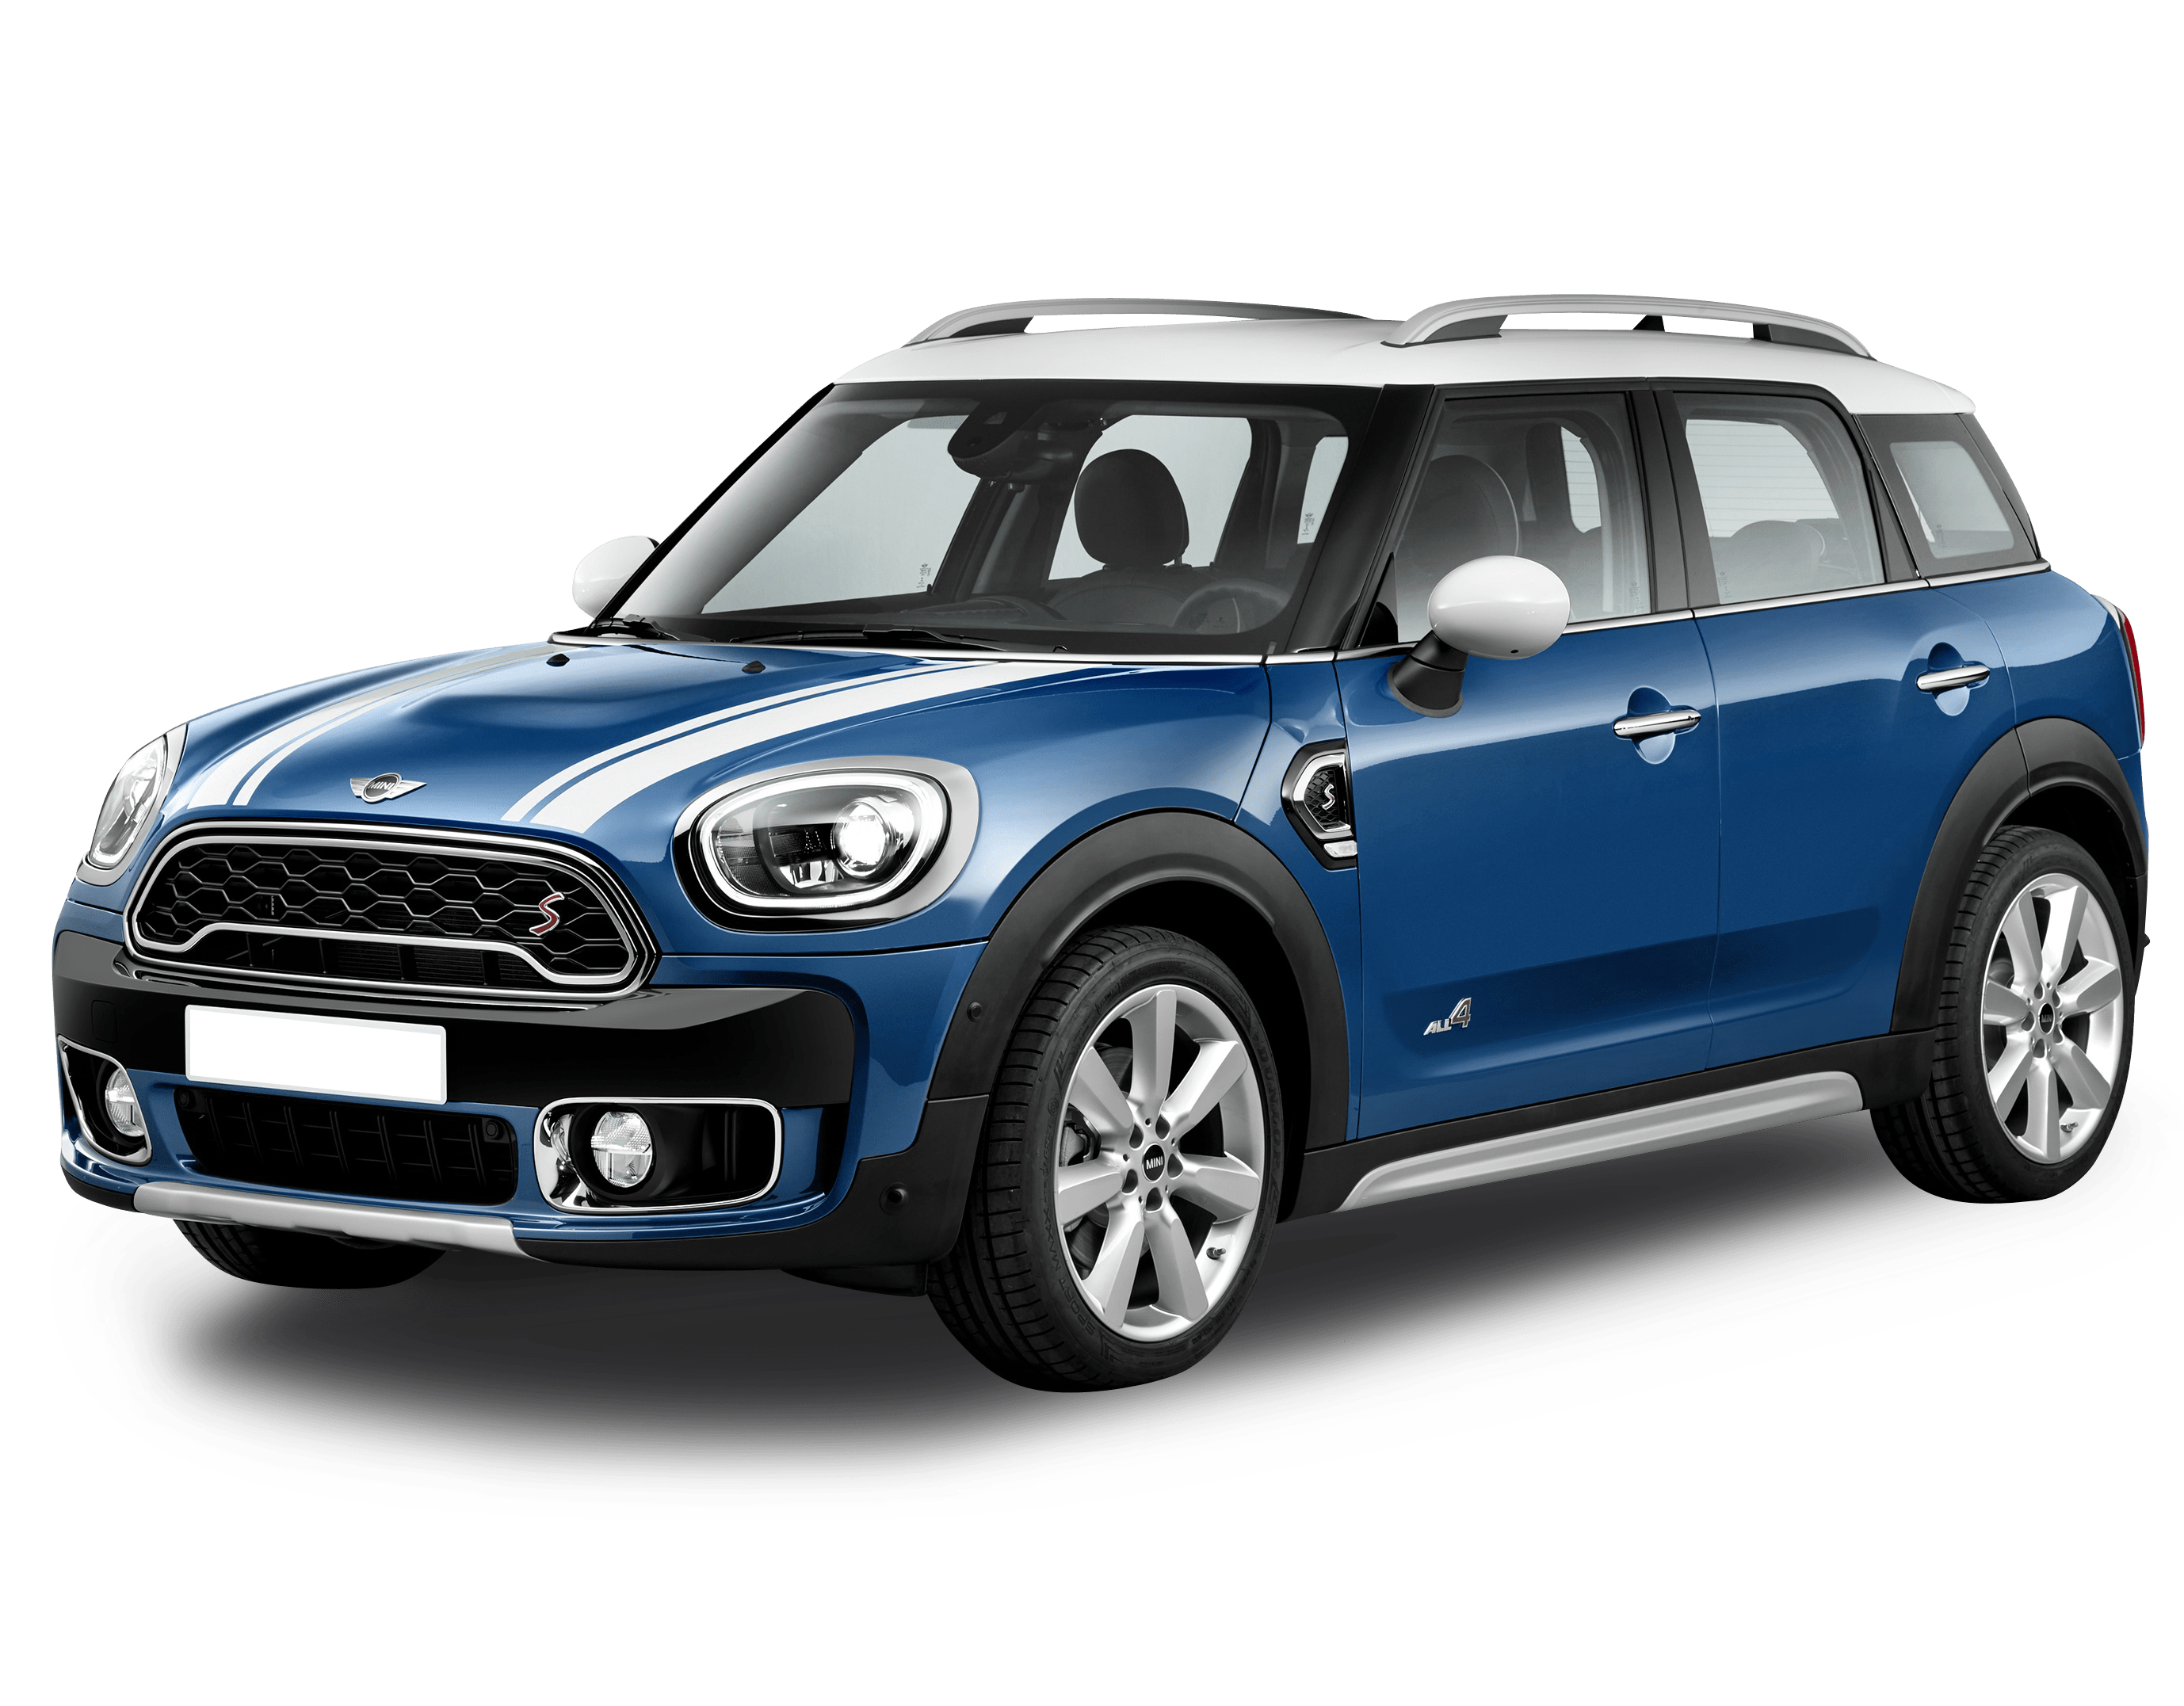 https://carsguide-res.cloudinary.com/image/upload/f_auto,fl_lossy,q_auto,t_default/v1/editorial/vhs/Mini-Countryman_0.png